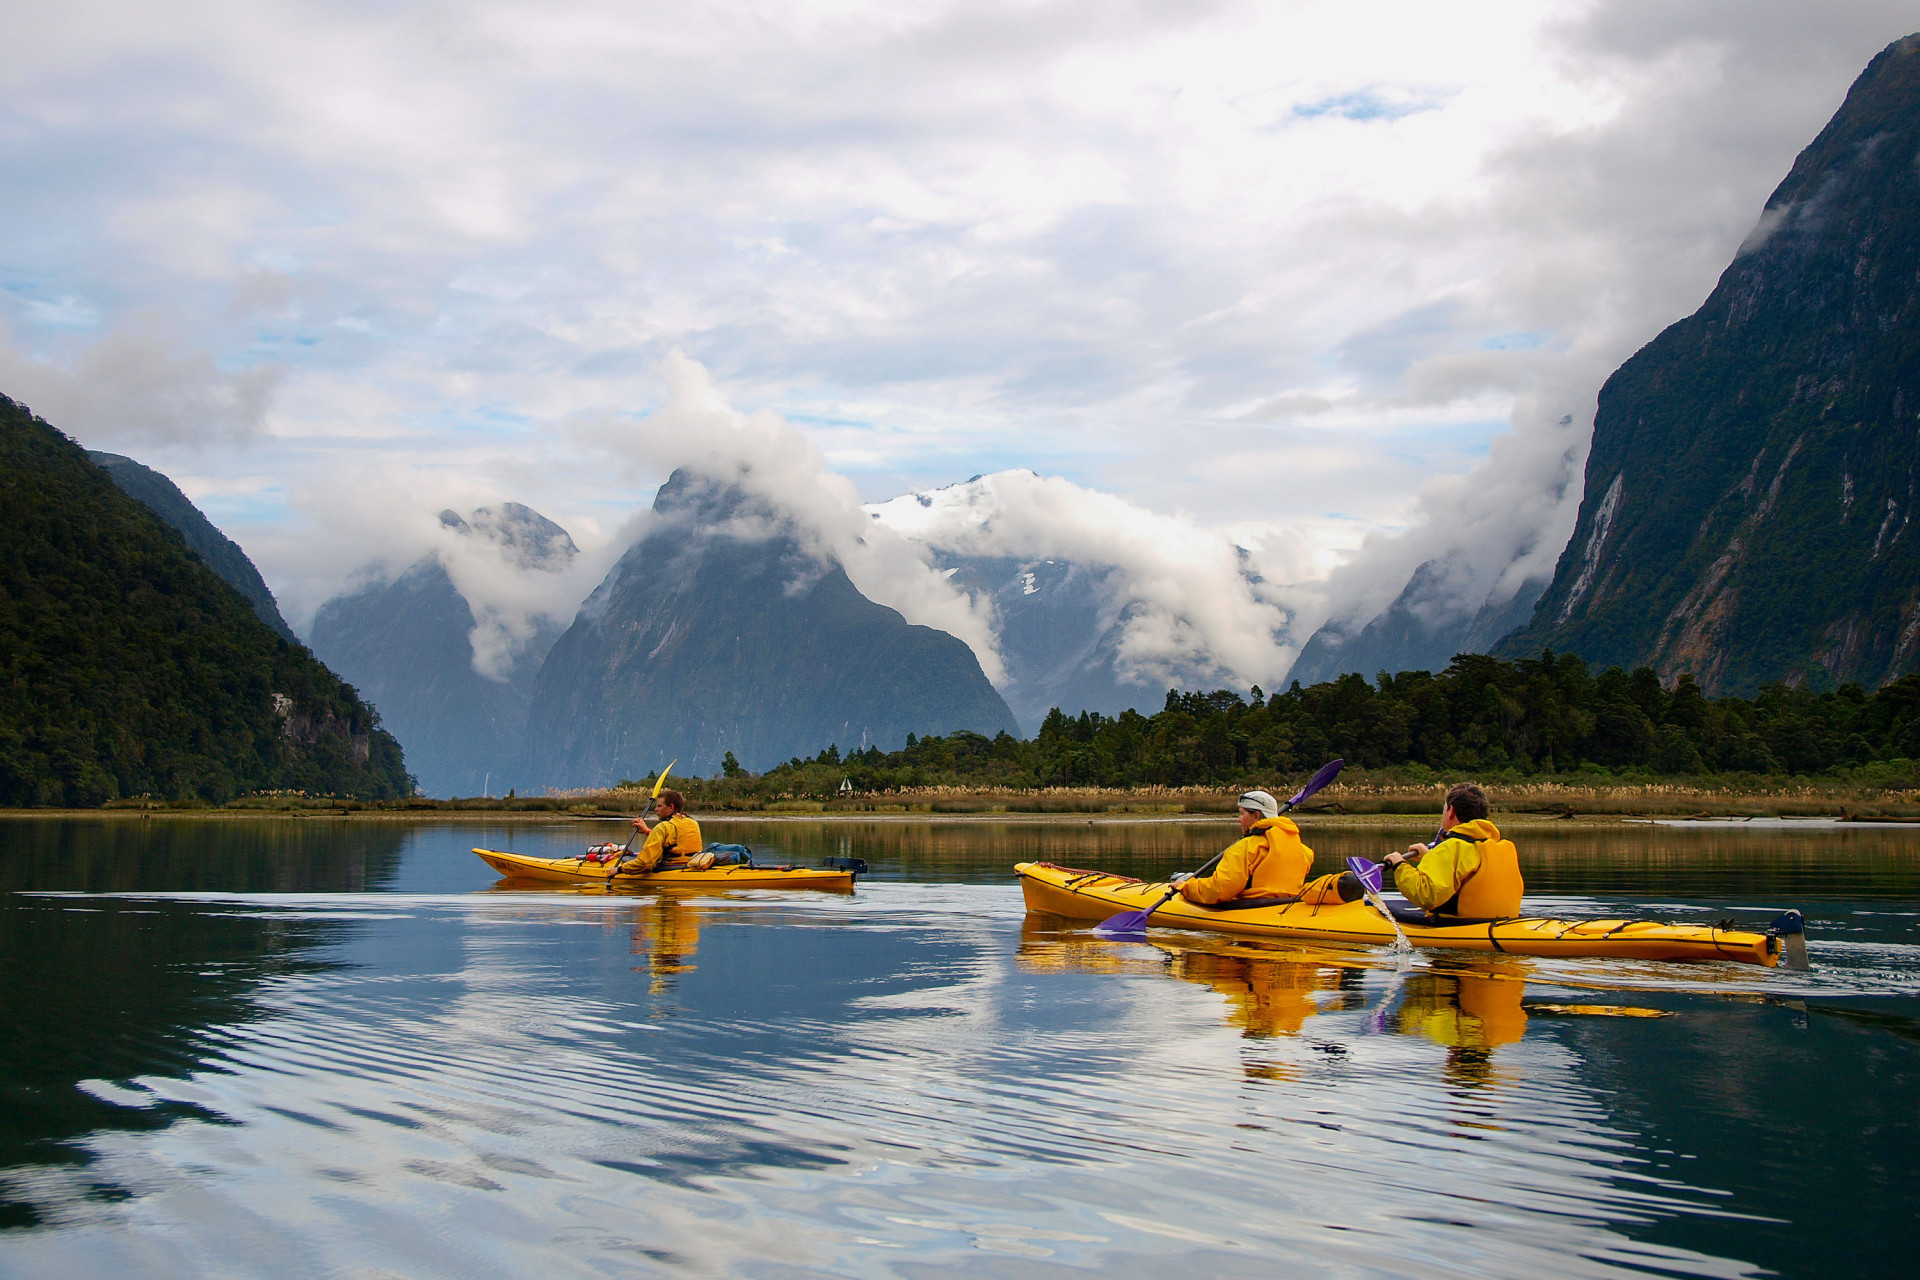 <p>Score: 7.029</p> <p>New Zealand is considered one of the best places in the world to live, by both locals and foreigners.</p><p><a href="https://www.msn.com/en-ca/community/channel/vid-7xx8mnucu55yw63we9va2gwr7uihbxwc68fxqp25x6tg4ftibpra?cvid=94631541bc0f4f89bfd59158d696ad7e">Follow us and access great exclusive content every day</a></p>